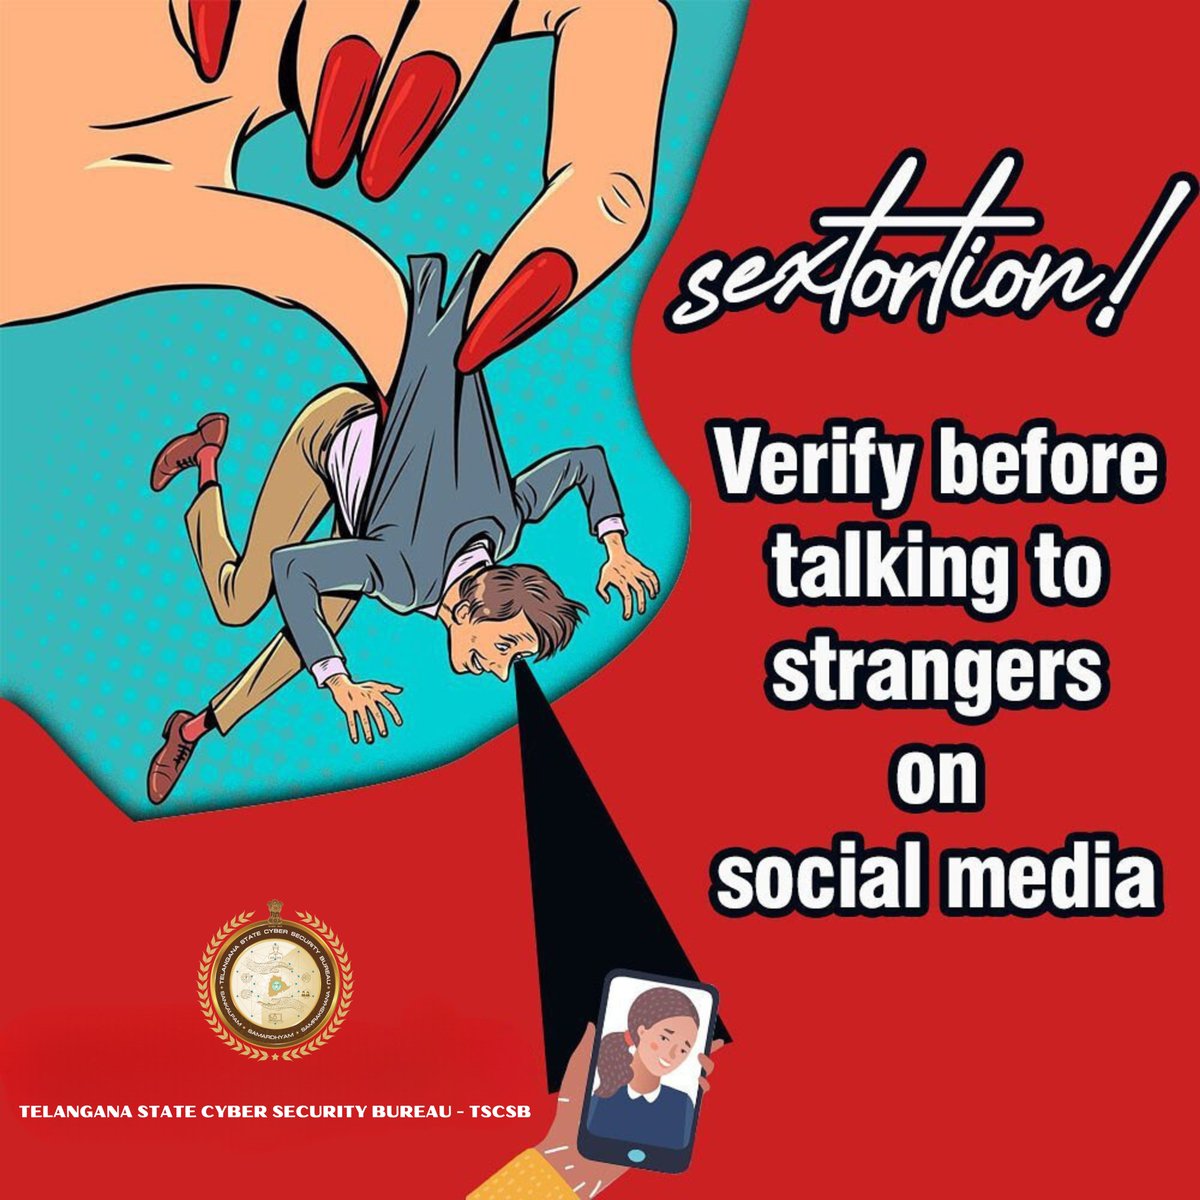 Be #CyberSmart | Verify before talking to strangers on #SocialMedia.
#Dial1930 to report online financial fraud and file complaint for any #cybercrime at cybercrime.gov.in
#CyberAware #CyberSafeIndia #Online #CyberThreats #Sextortion #TSCSB.